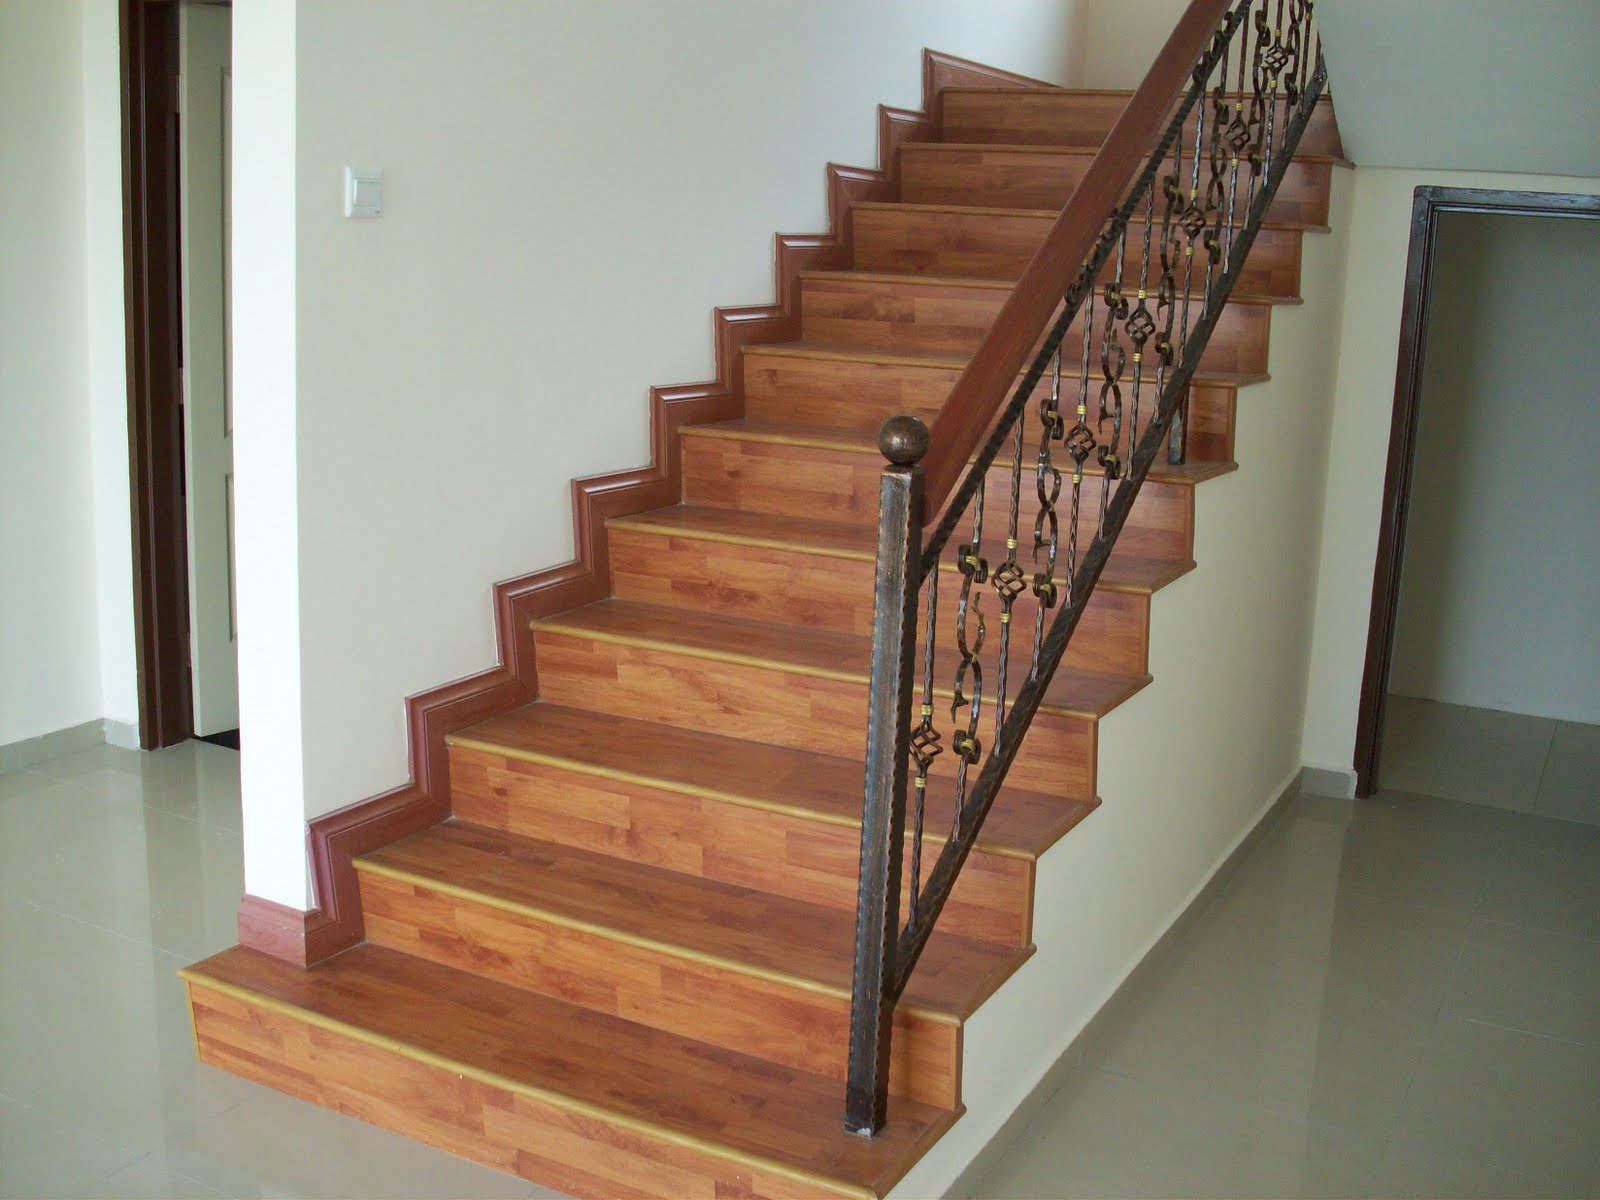 How To Install Wood Flooring On Stairs, Cost To Install Hardwood Floors On Stairs